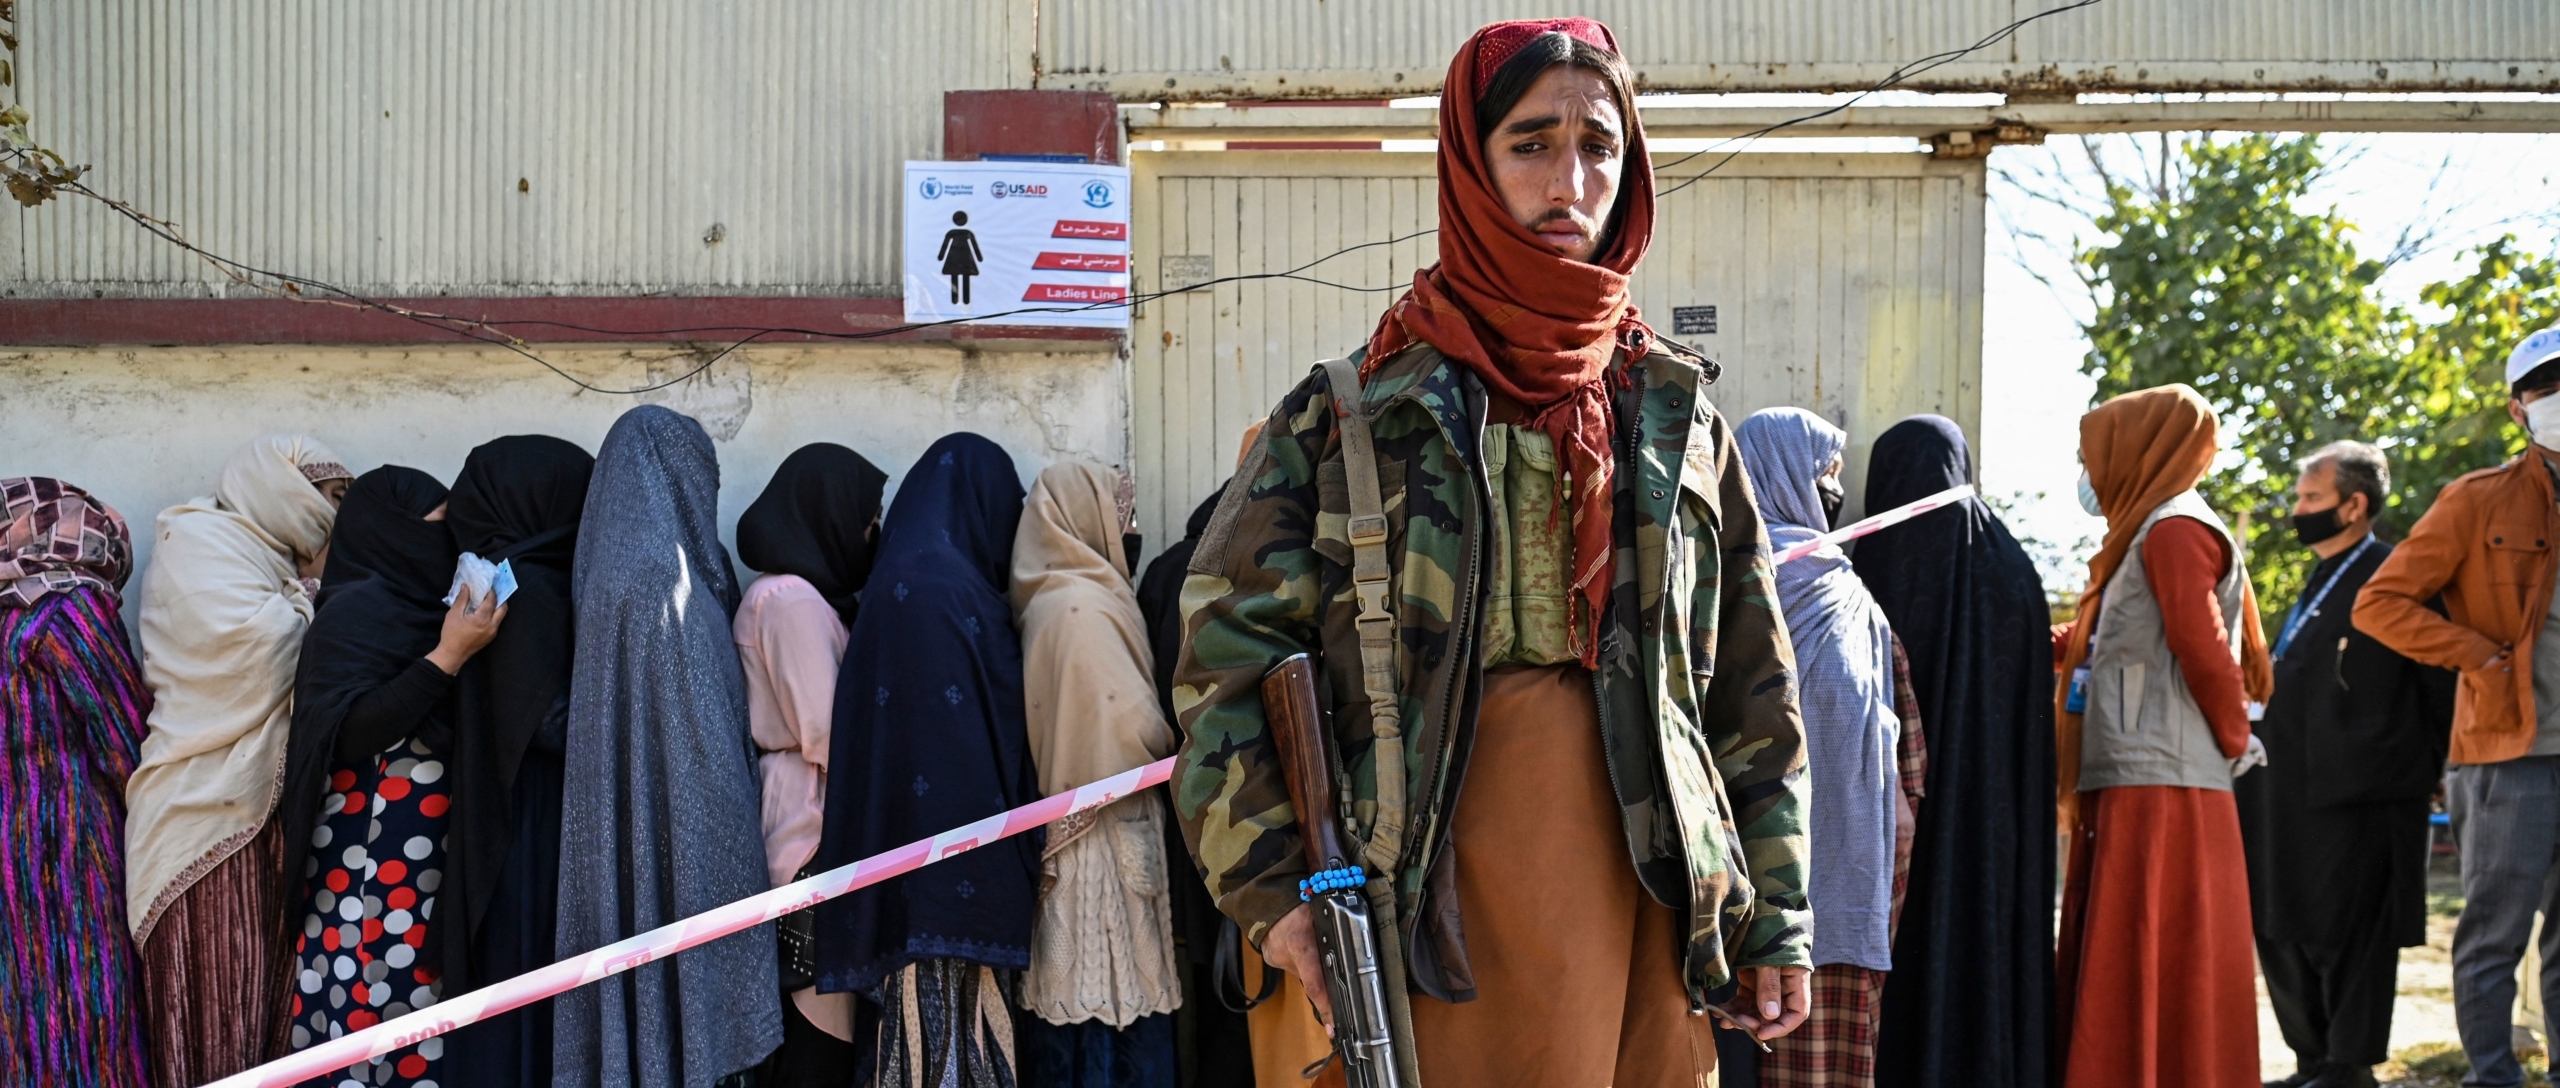 Could World Court Address Women's Rights in Afghanistan?